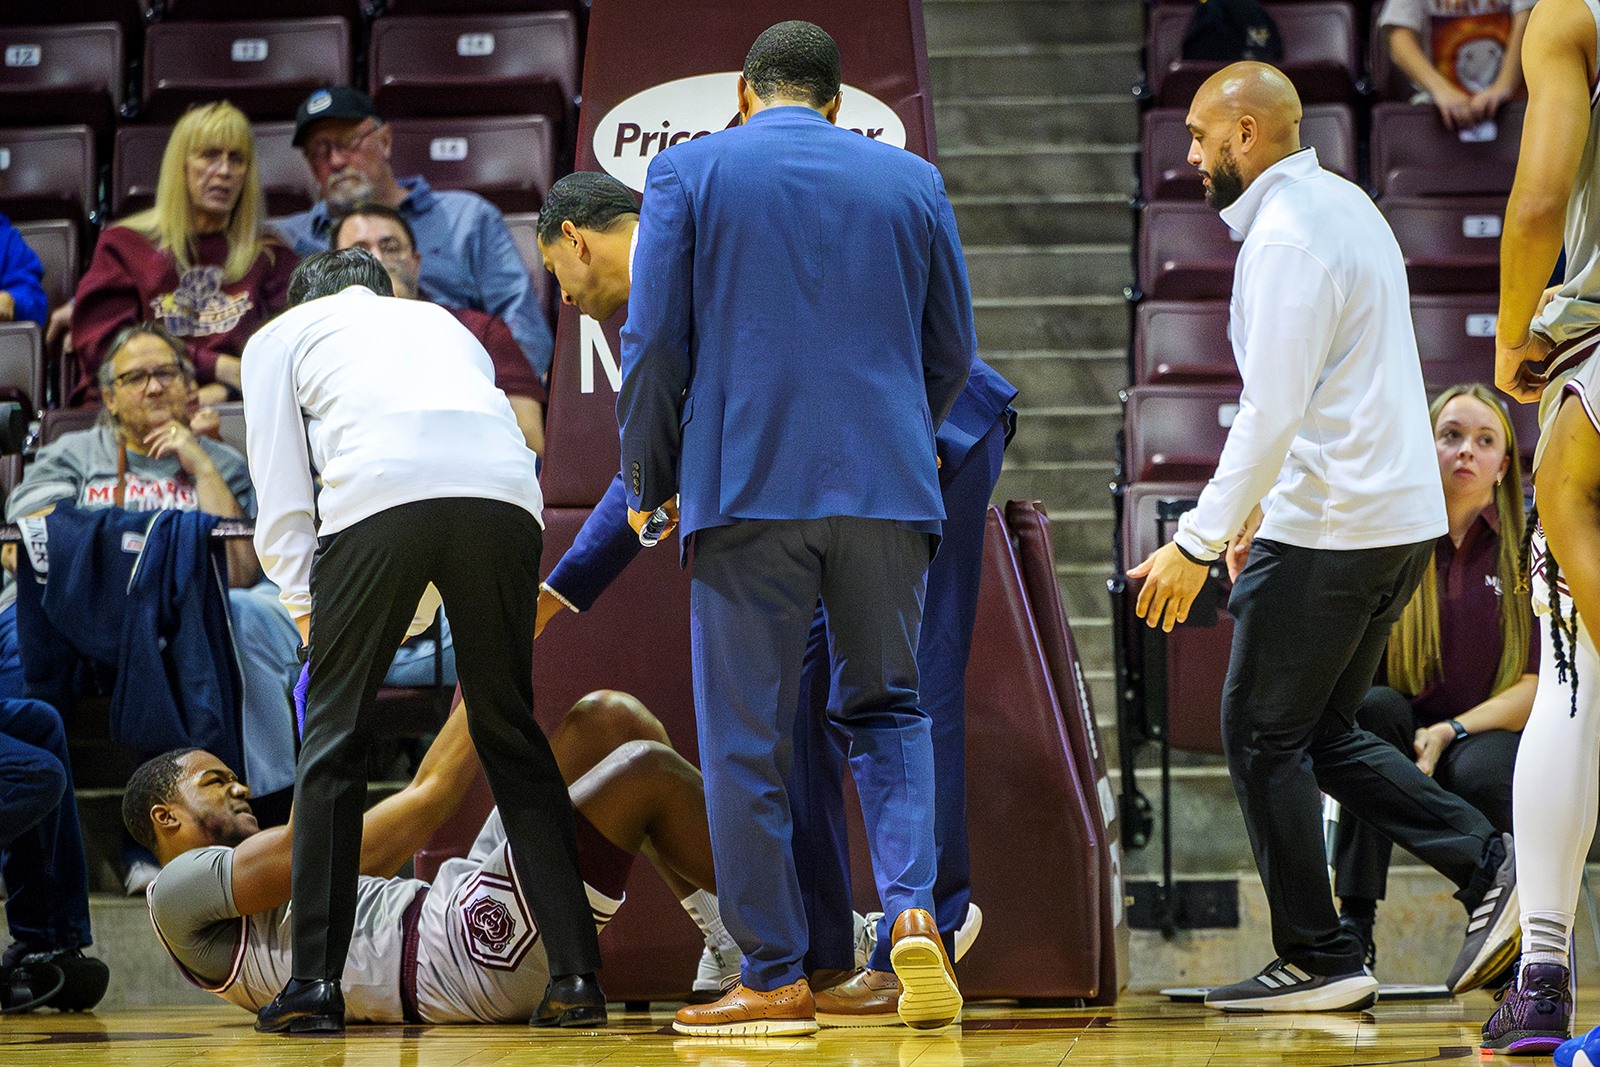 Trainers and coaches tend to Missouri State Basketball player Damien Mayo Jr. after he suffered an injury during a game